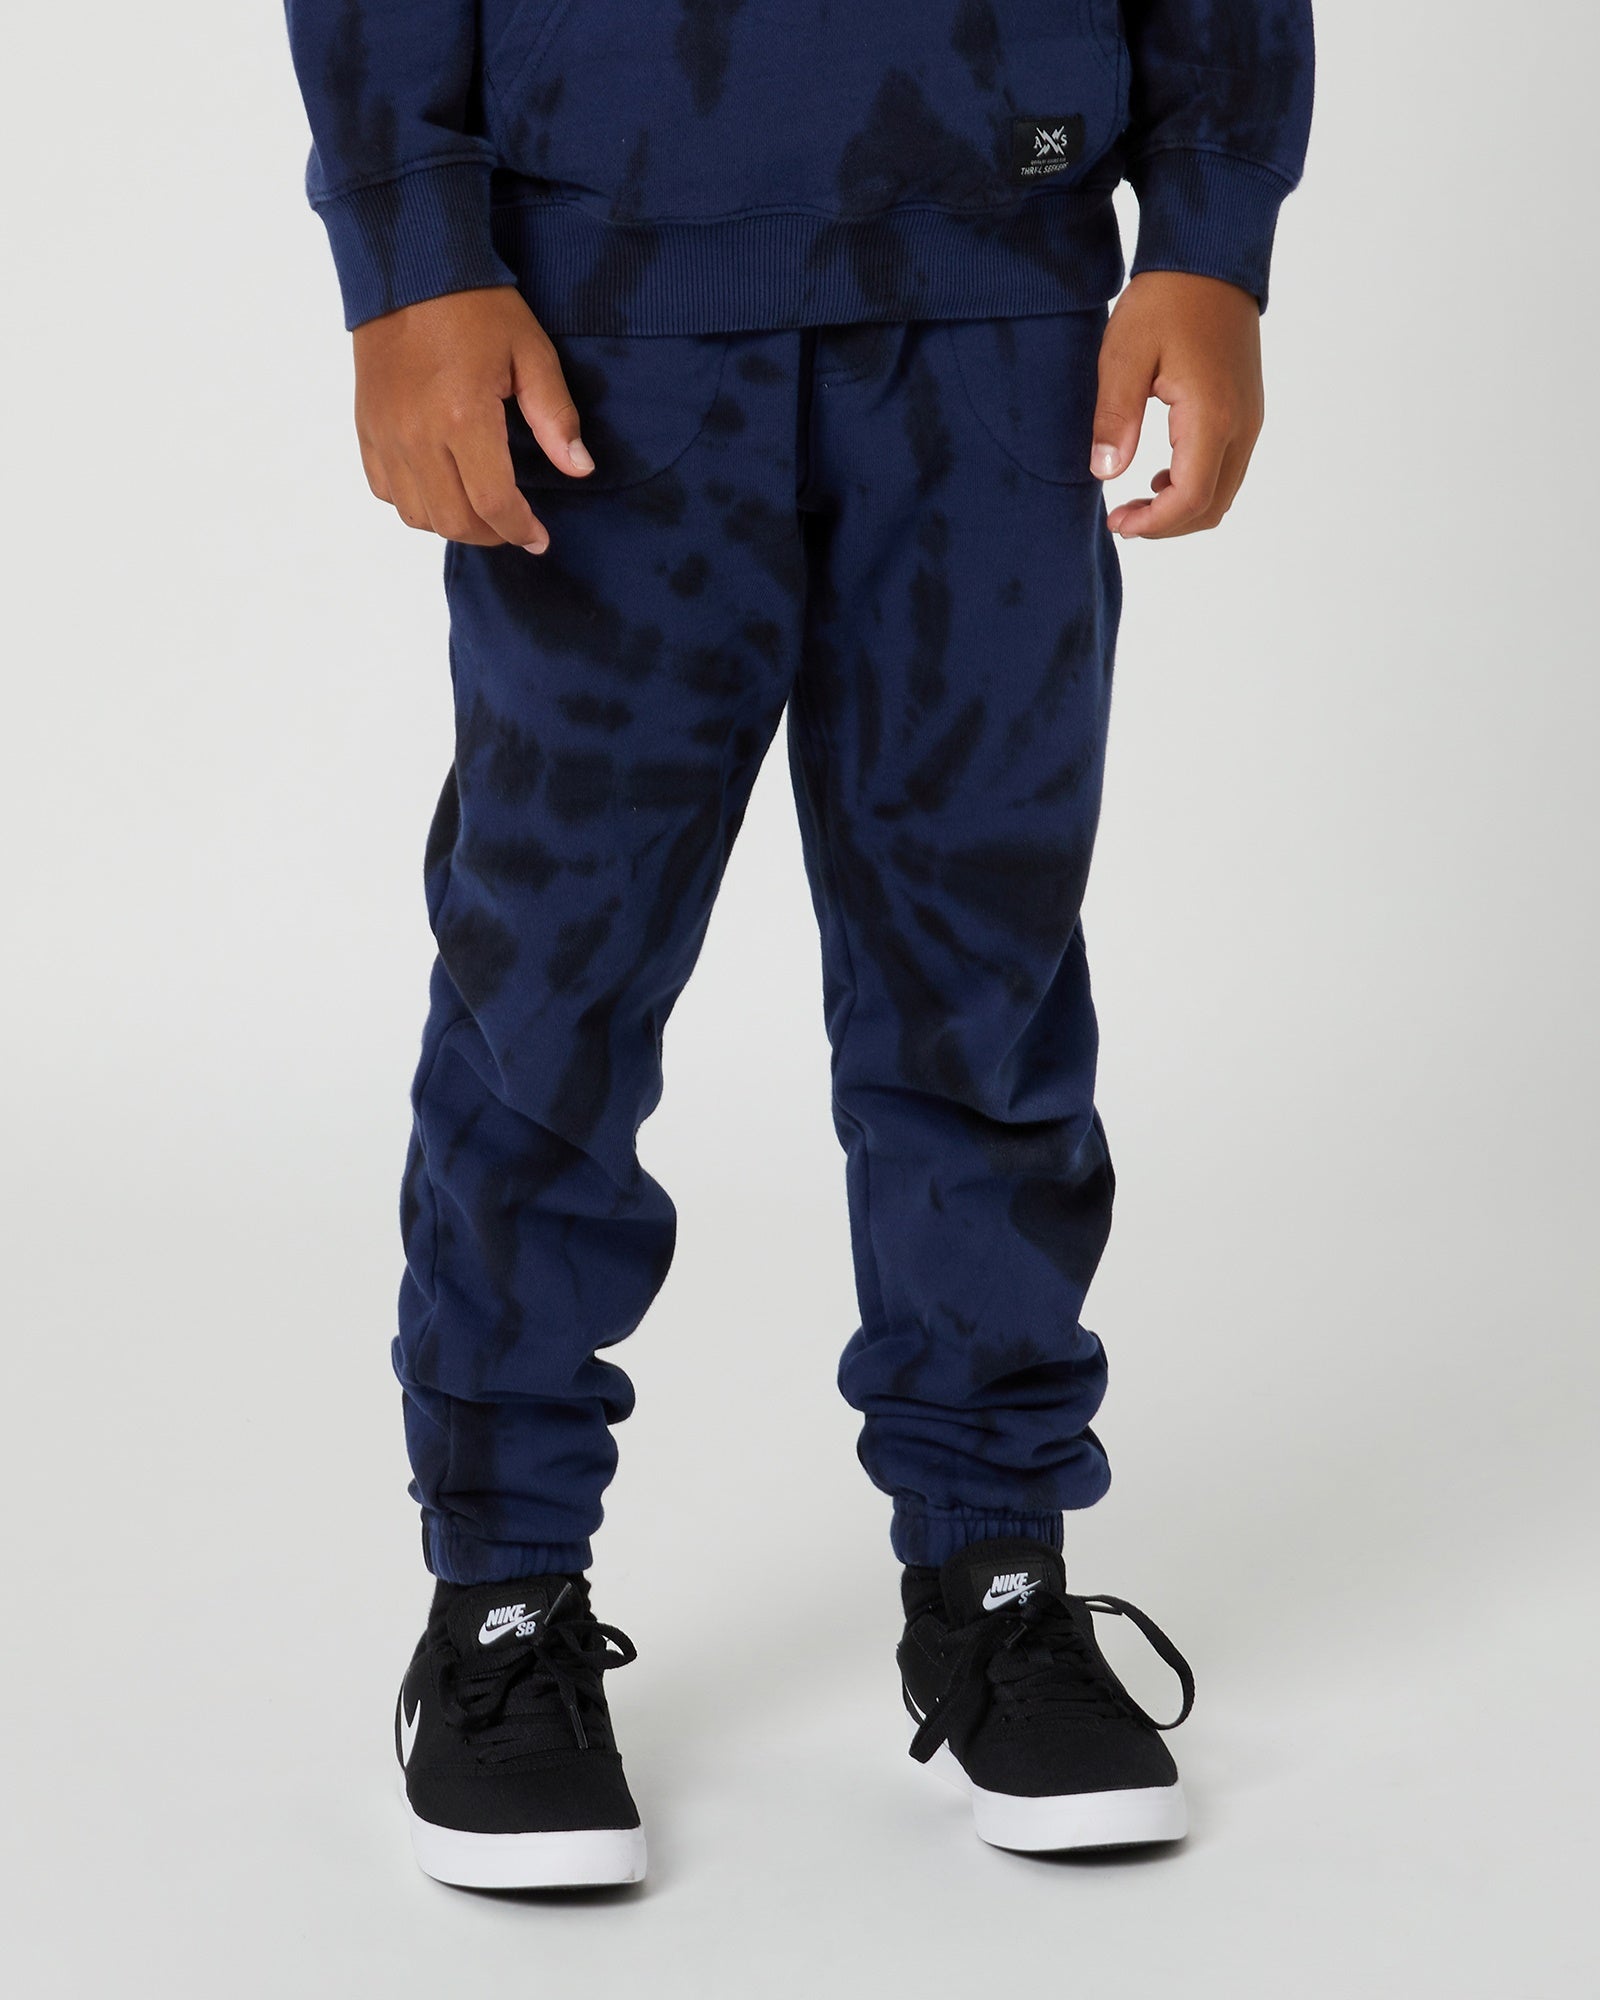 Expertly crafted Kids Box Trackpants by Alphabet Soup with 100% cotton and a blue & black tie dye print. Features a comfortable regular fit, elasticated waist with drawcord, and convenient hand and back pockets.